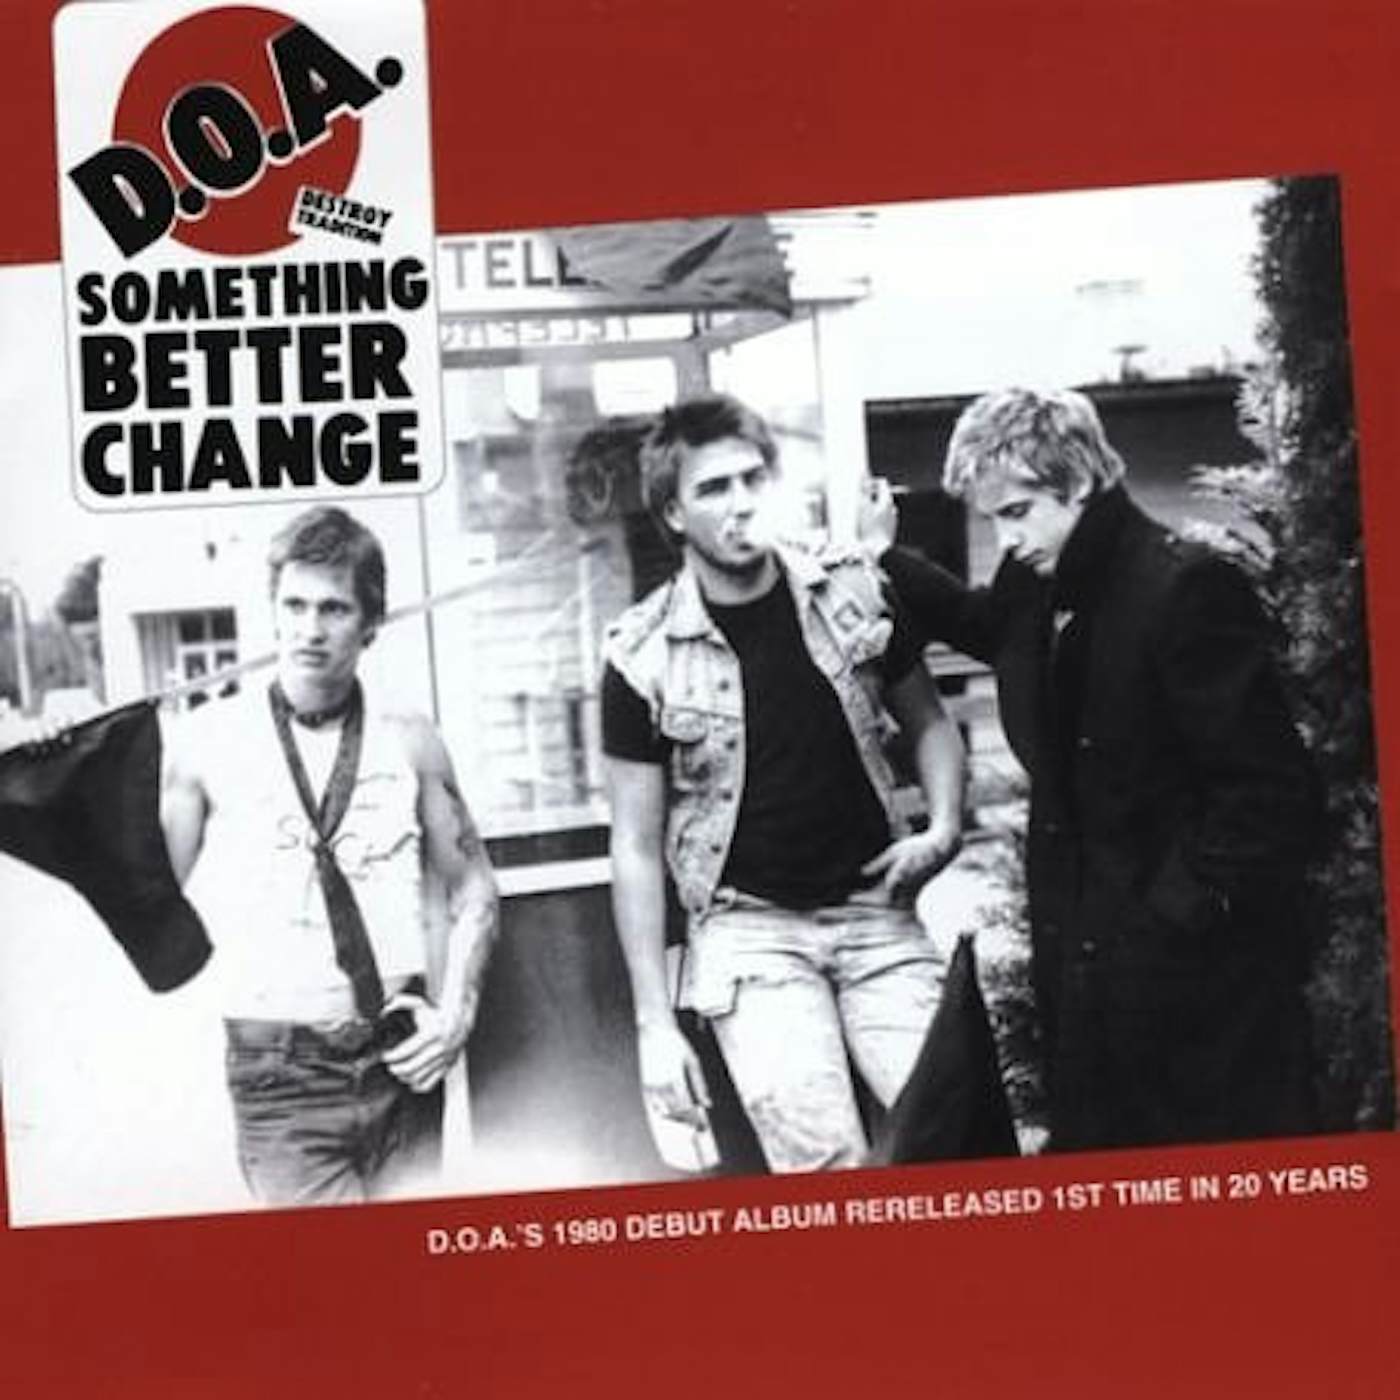 D.O.A. Something Better Change Vinyl Record